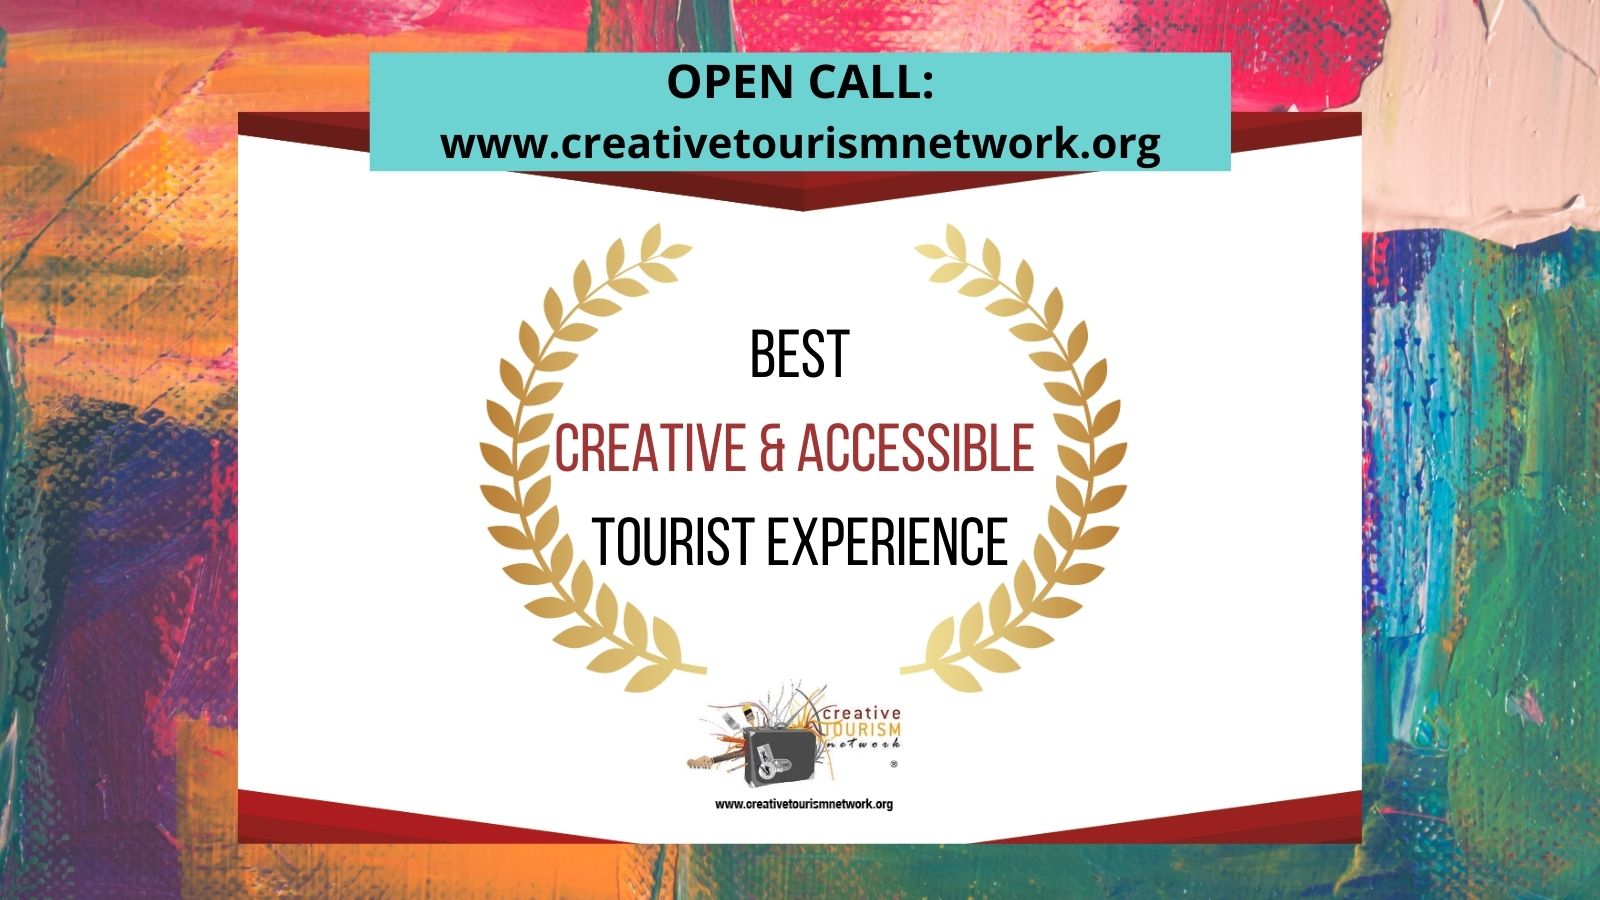  Open Call:  "Best Creative & Accessible Tourist Experience"